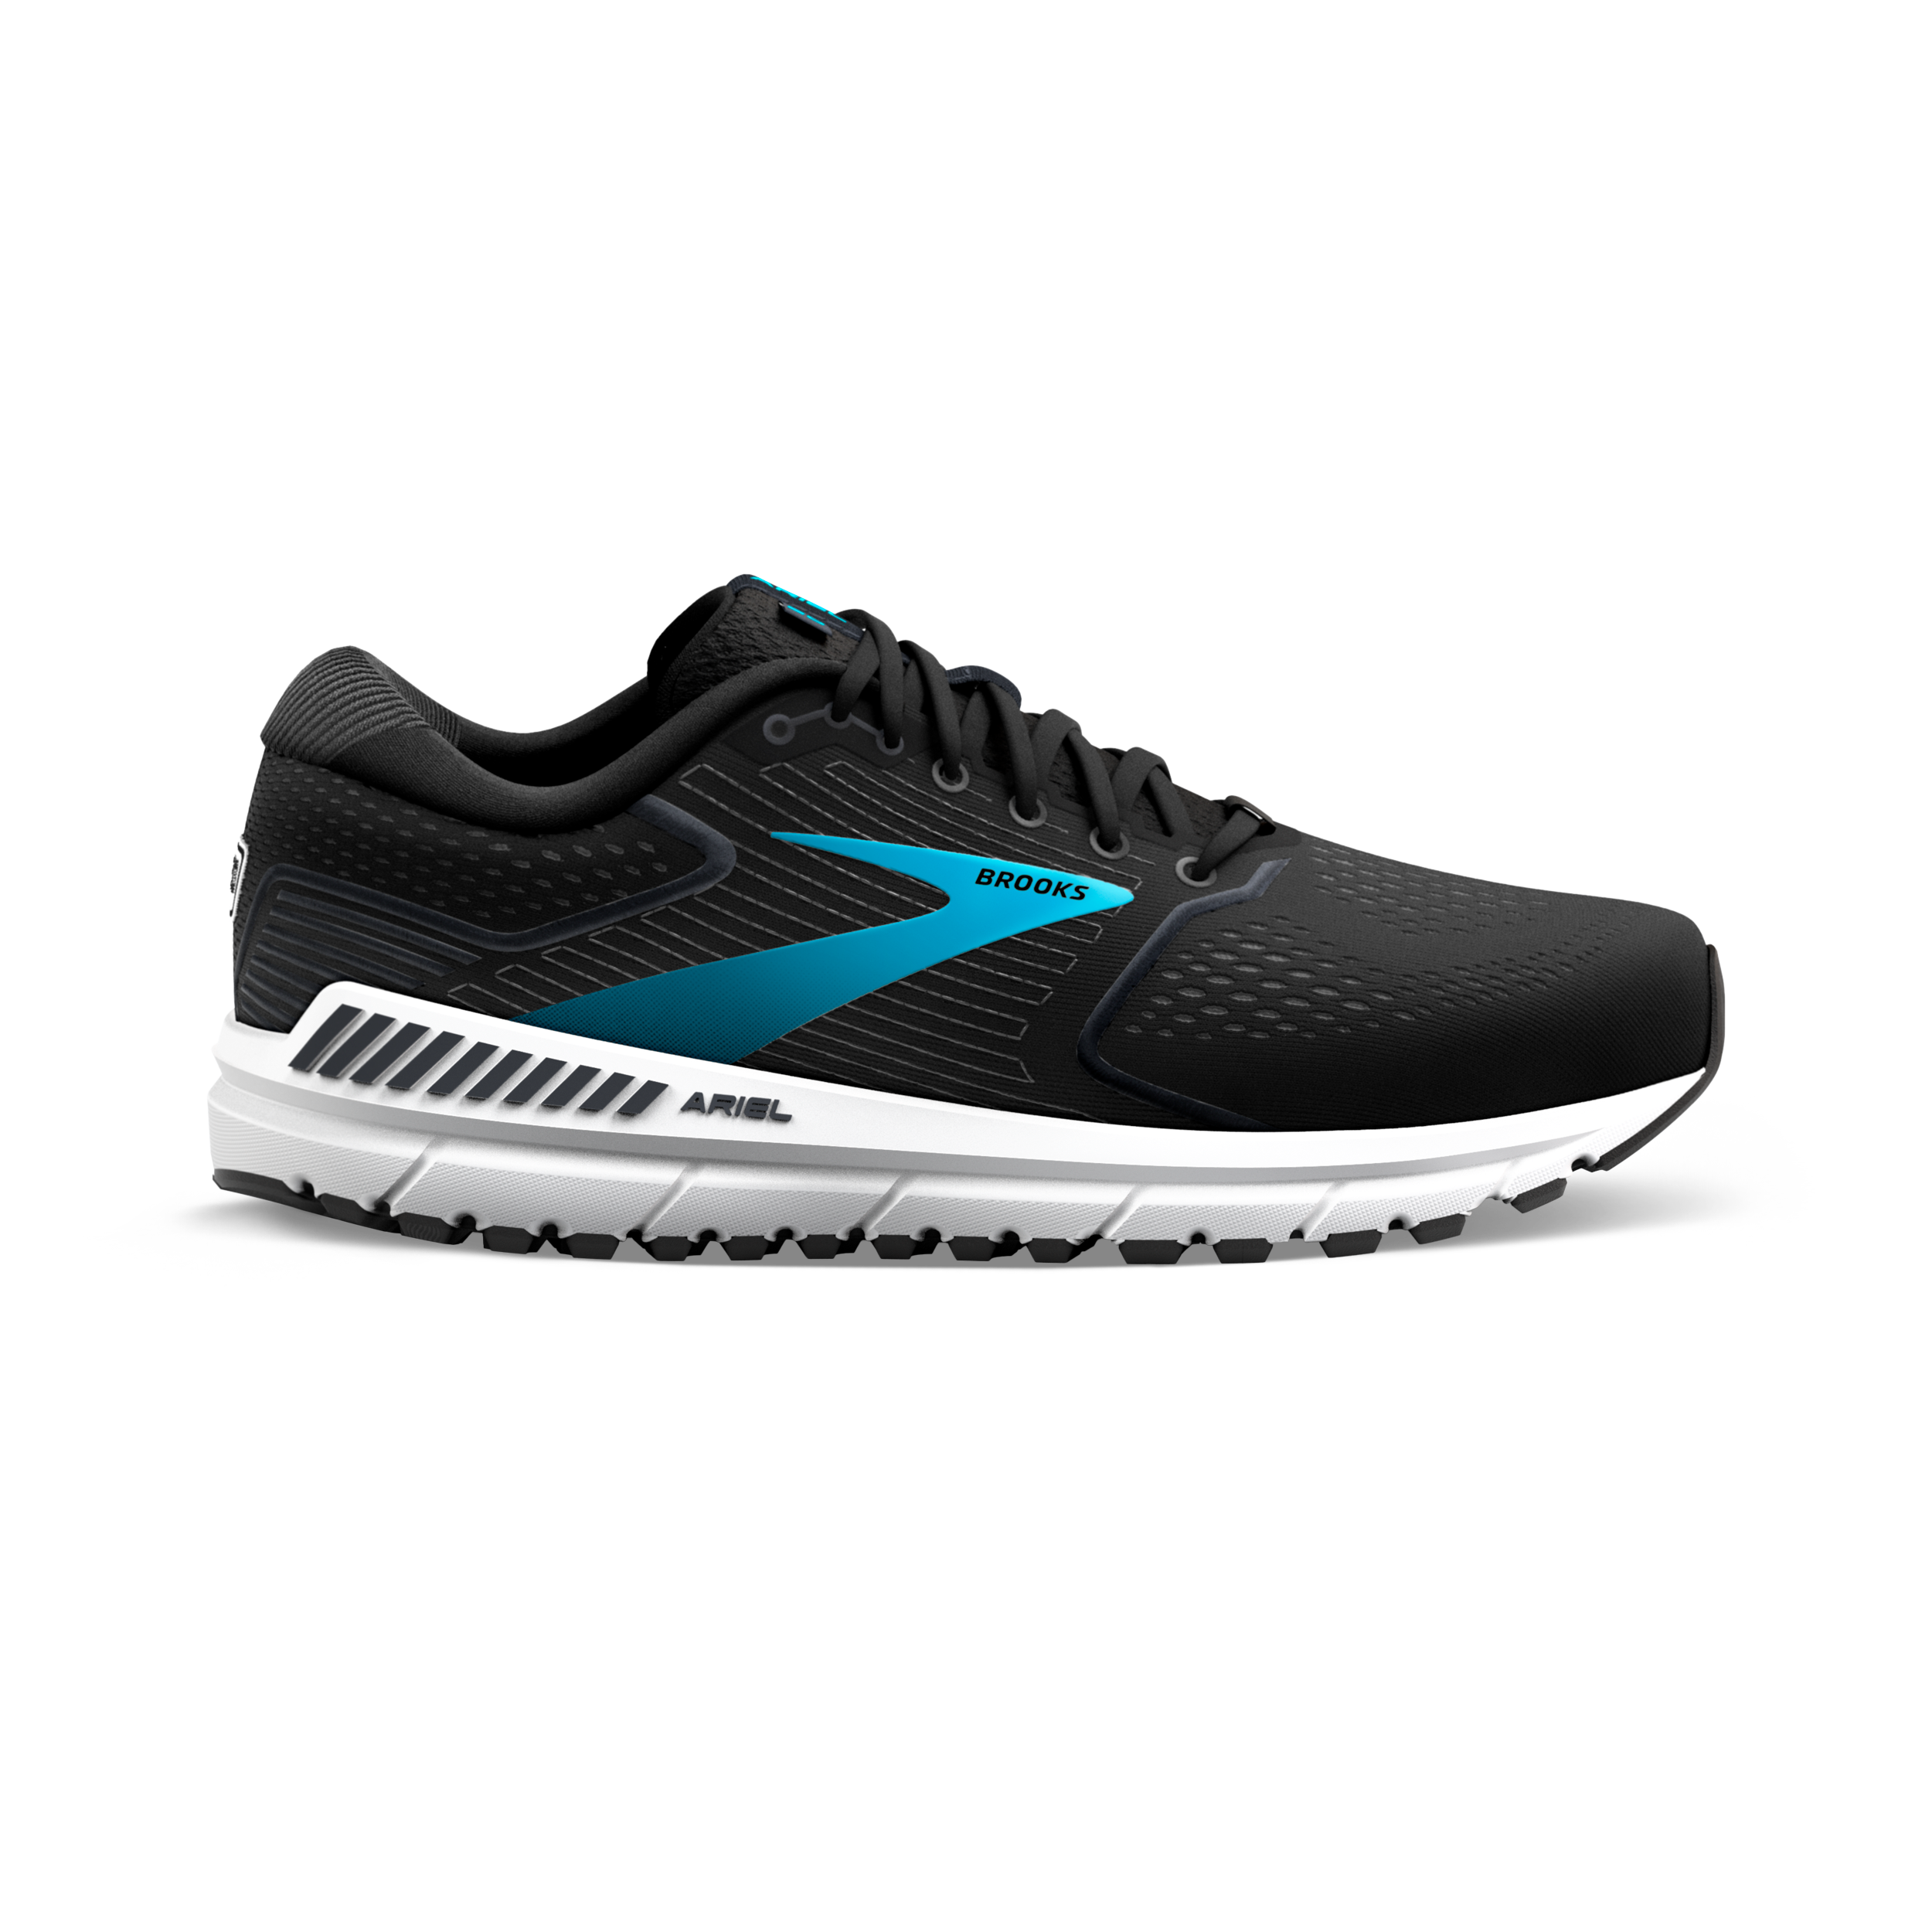 Where Can I Buy Brooks Ariel Shoes?